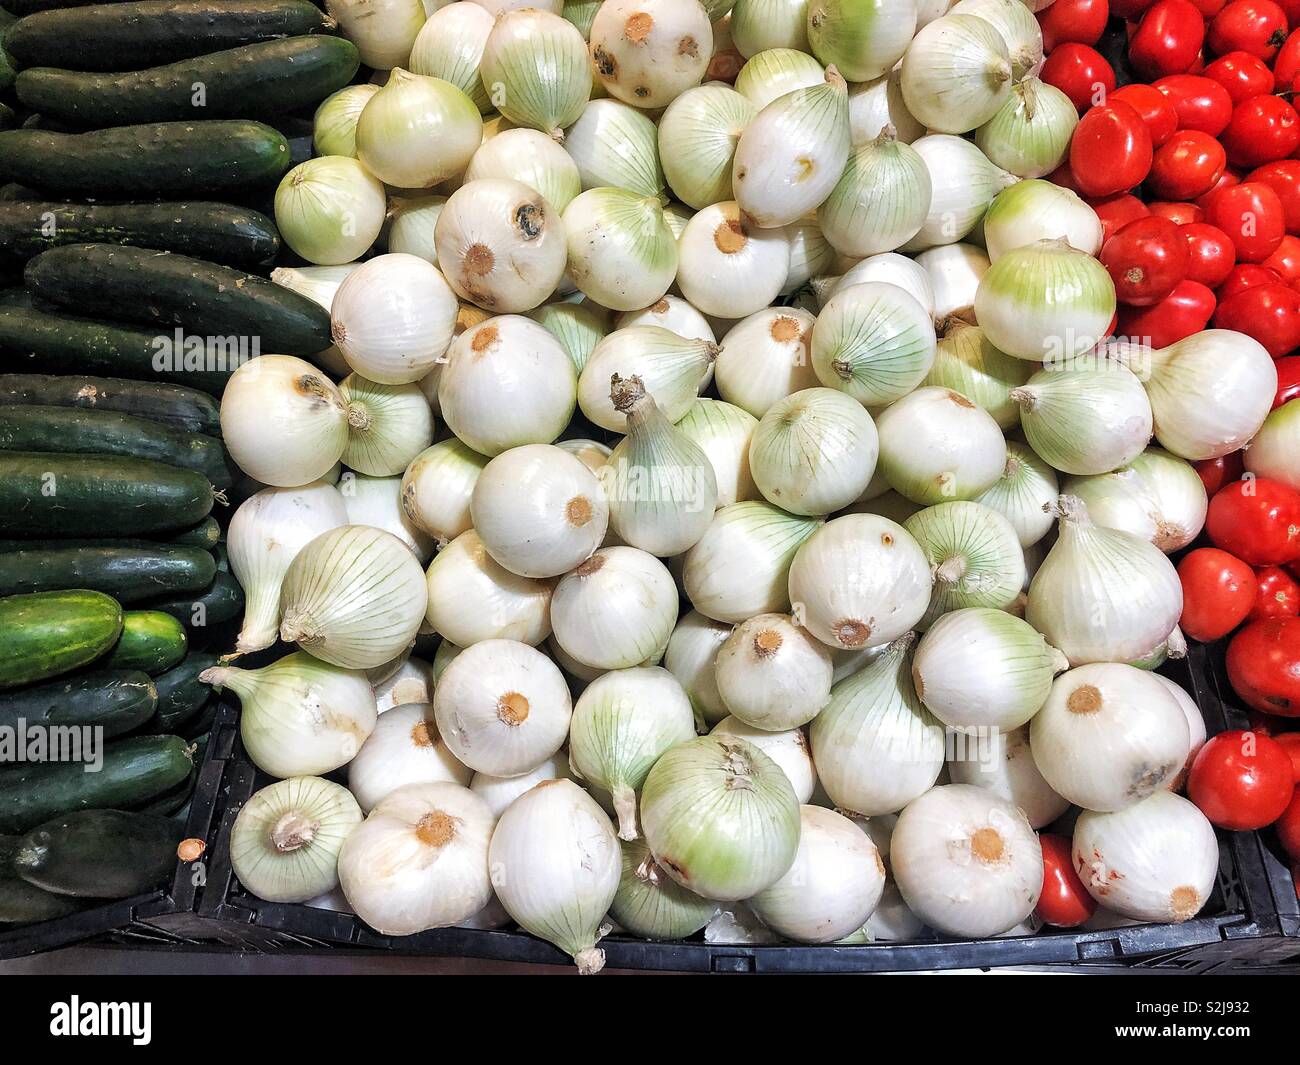 colorful display of fresh produce in mexican supermarket Stock Photo